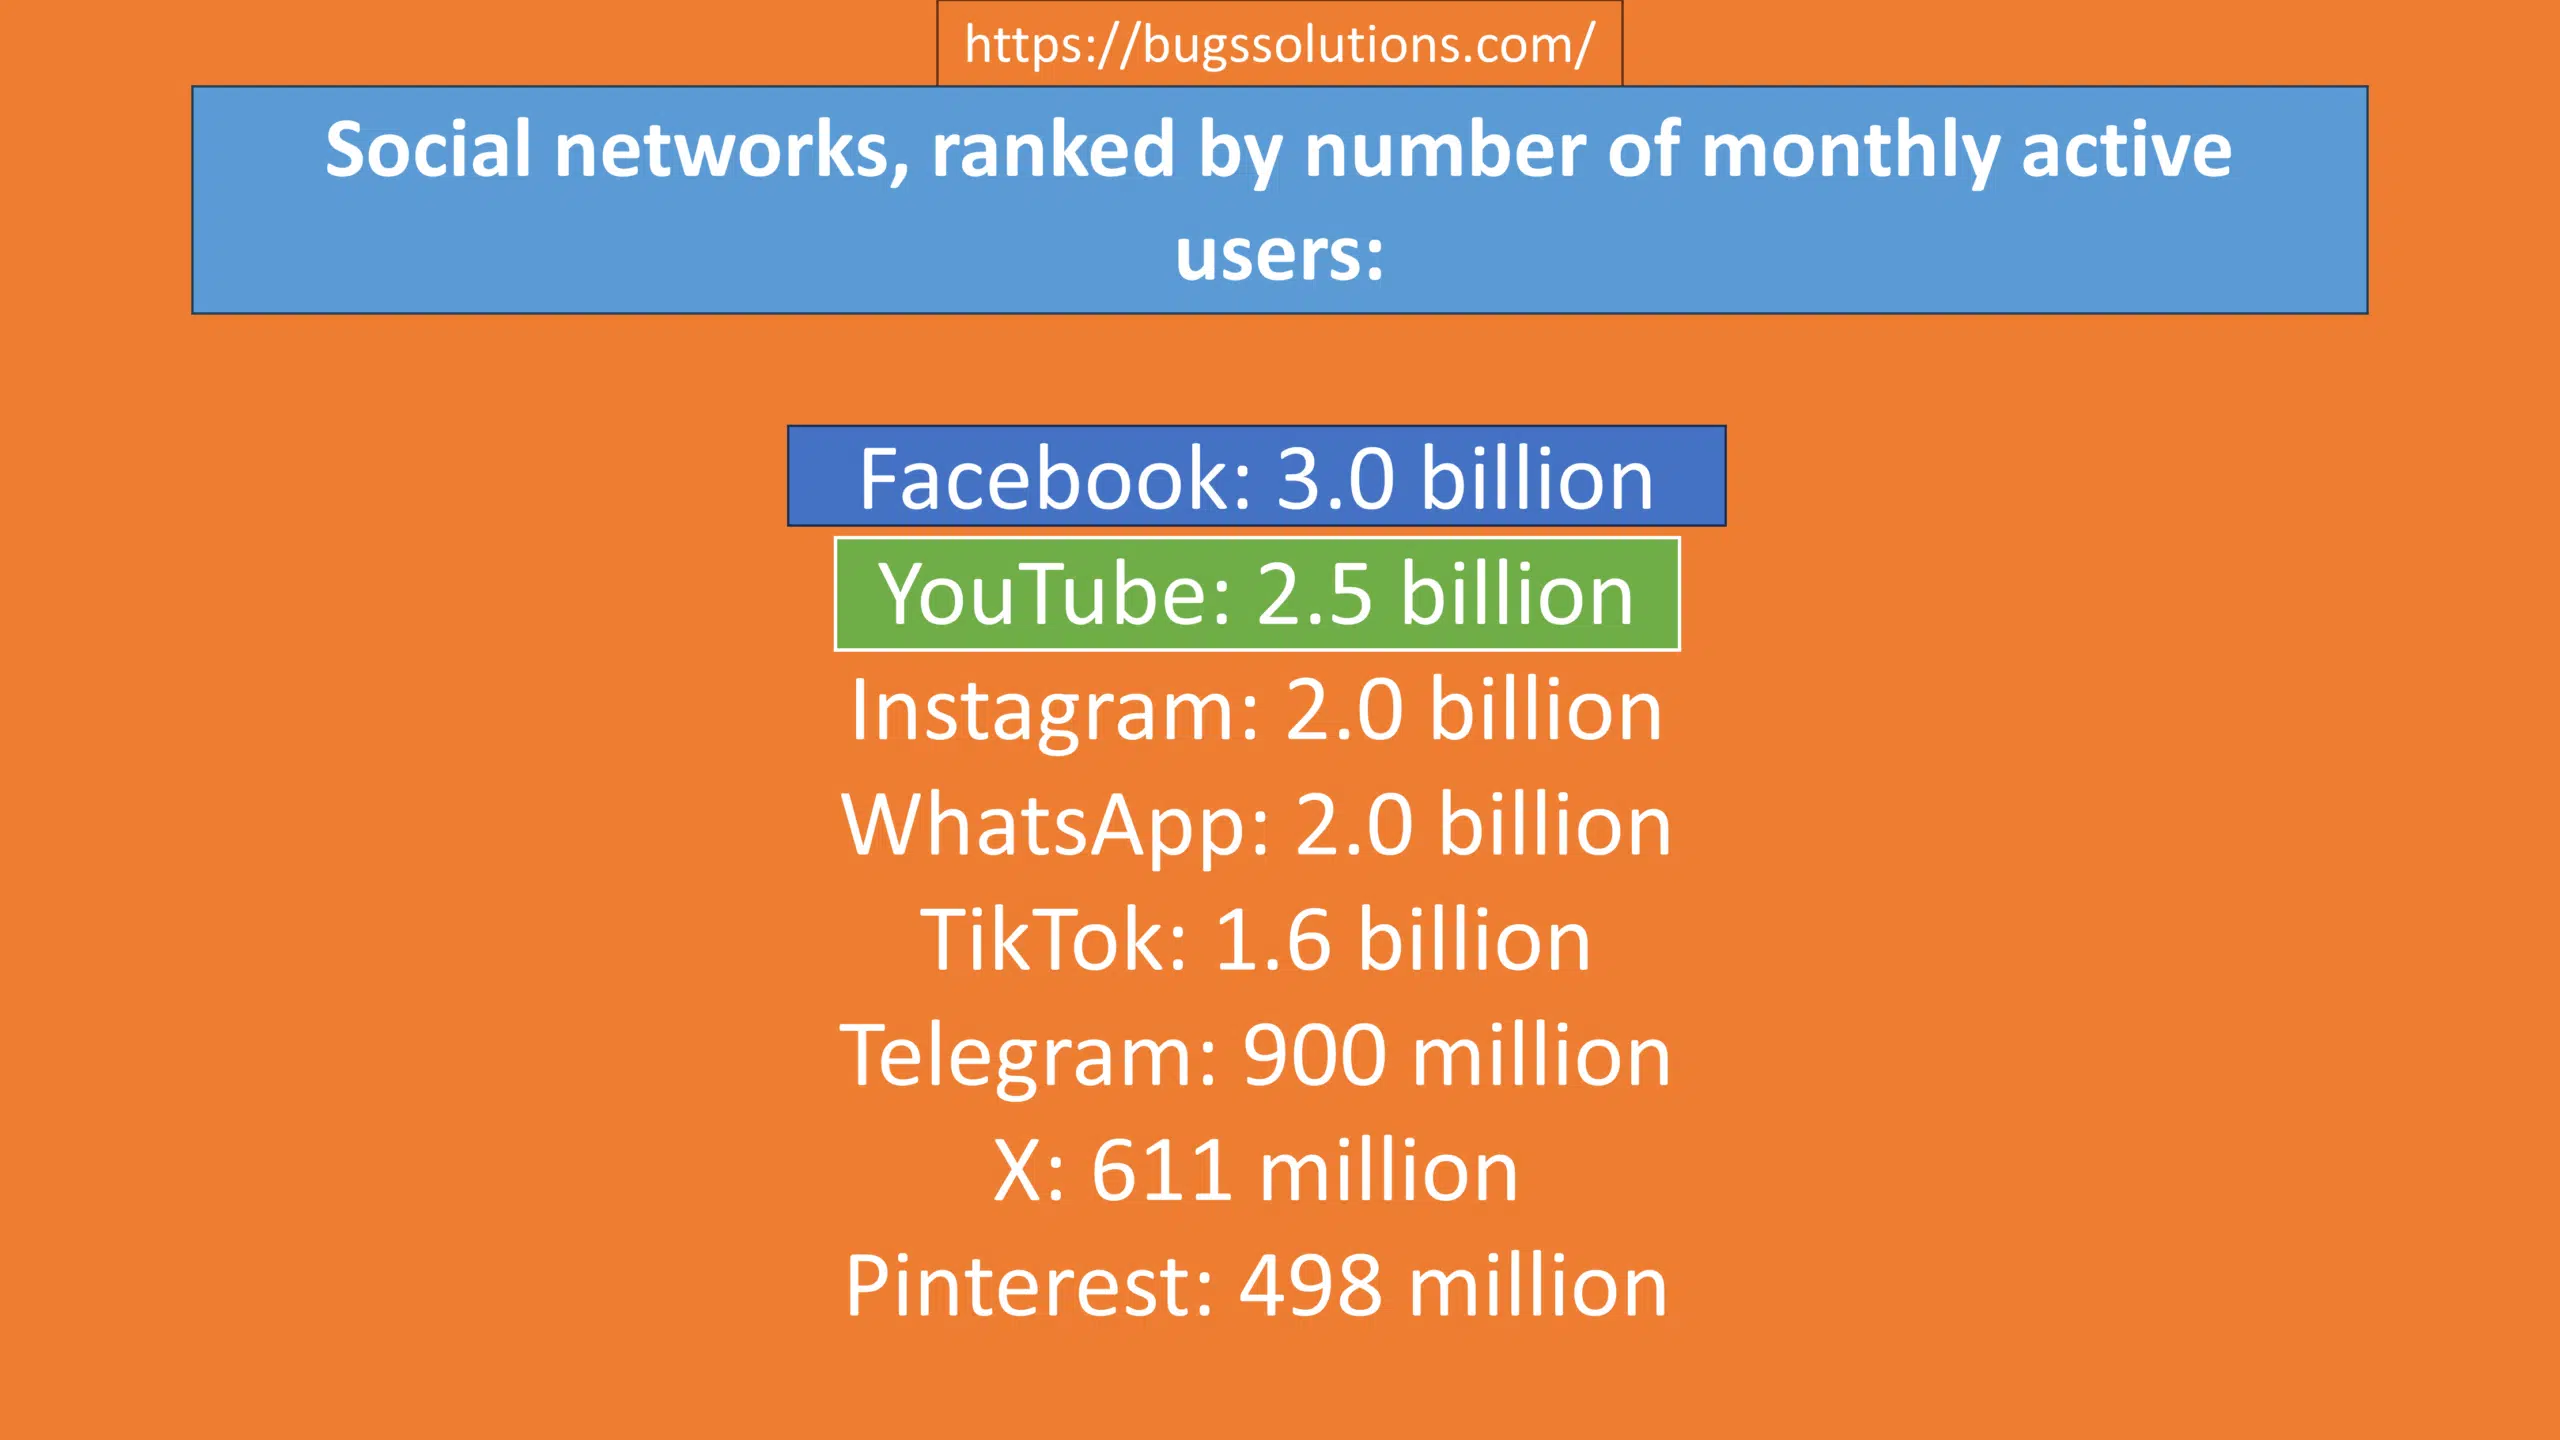 Social networks, ranked by number of monthly active users: